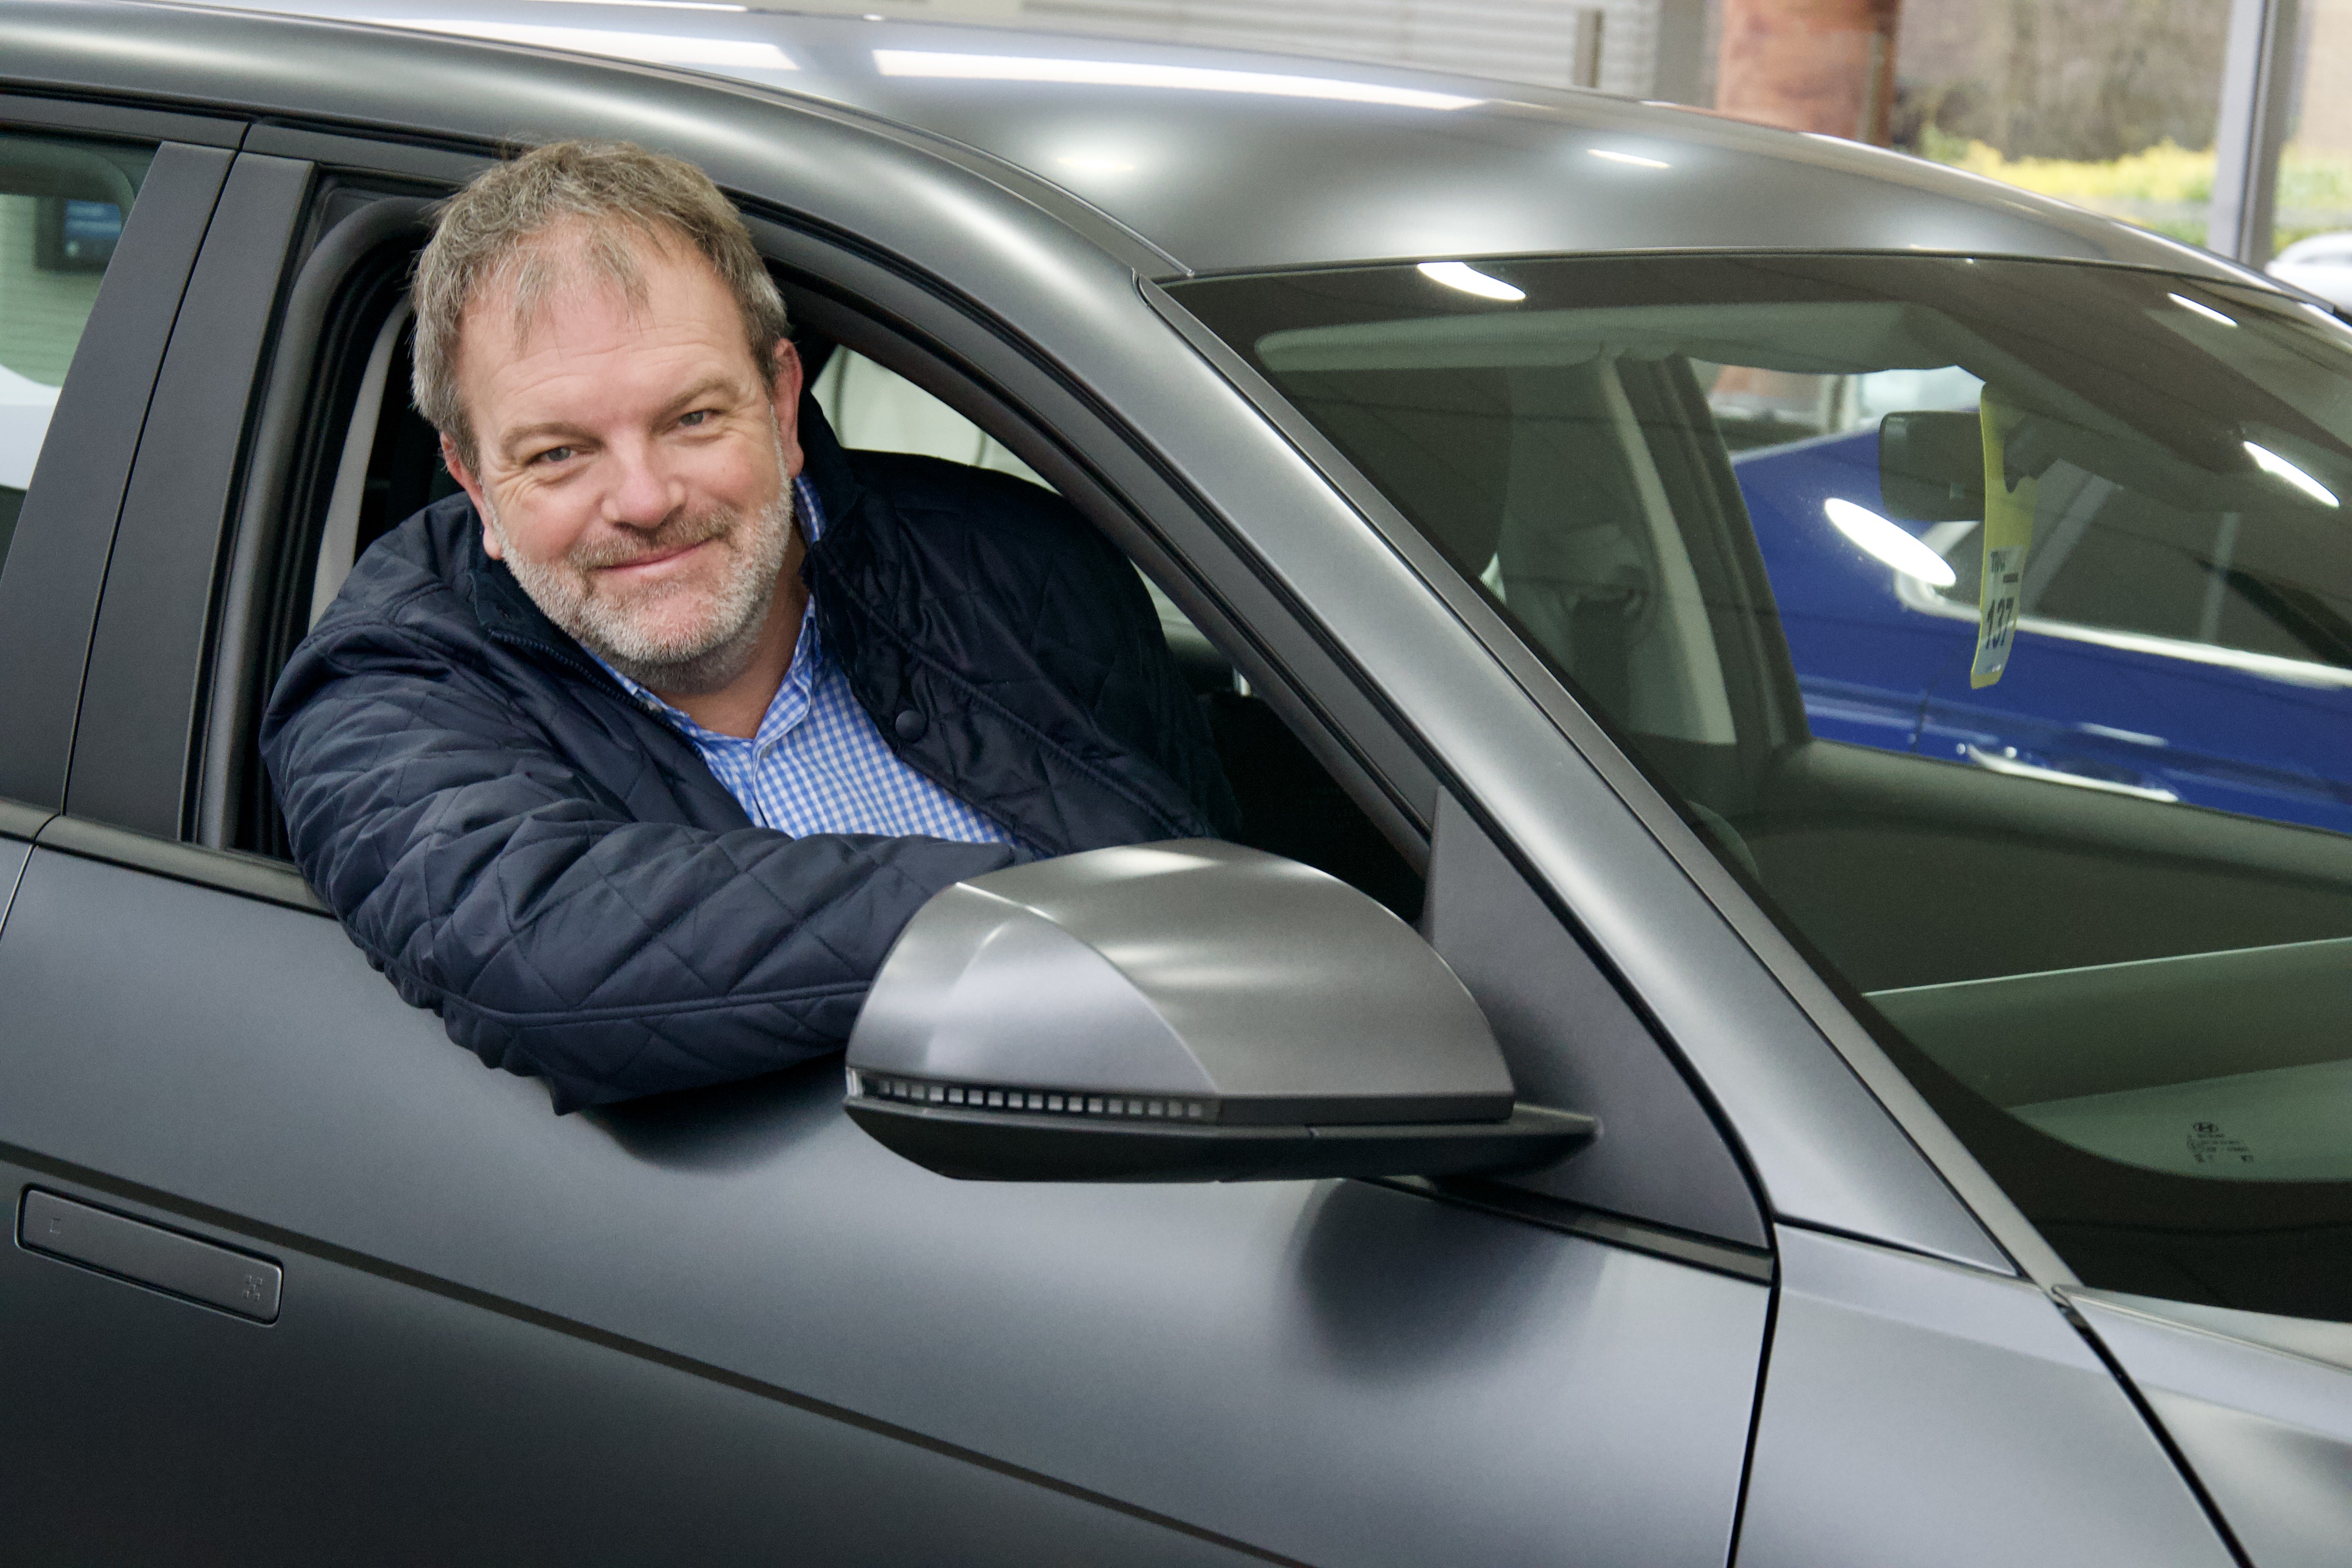 Swindon motor dealer pledges to curb customer anxiety in face of cost of living crisis